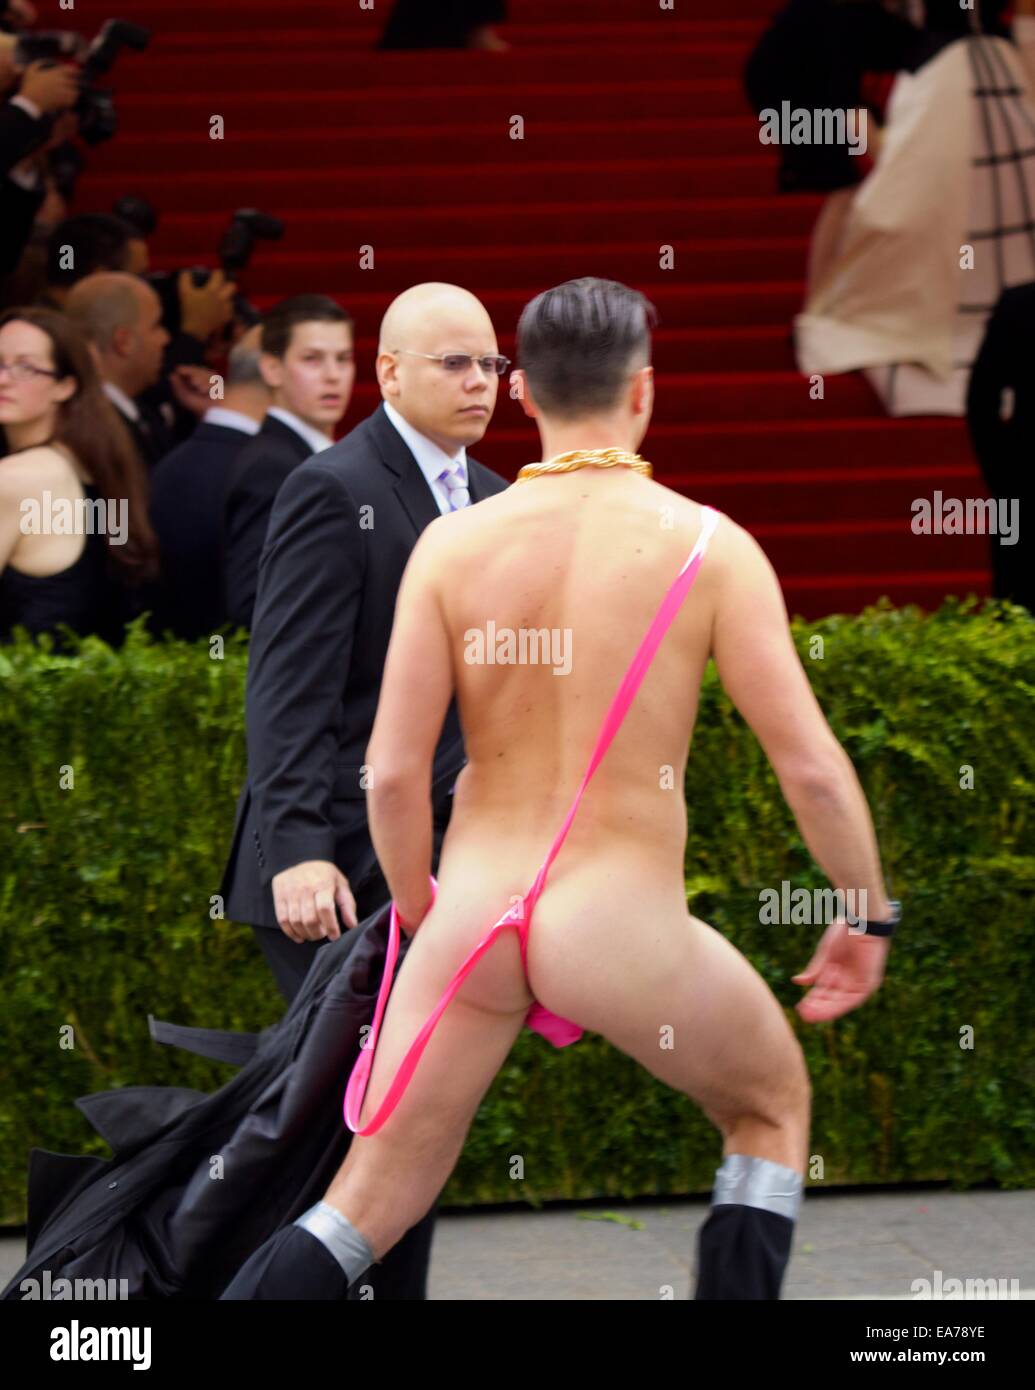 2014 Met Gala at the Metropolitan Museum of Art - Male streaker wearing a pink mankini and gold chain crashes the red carpet  Where: New York City, New York, United States When: 05 May 2014 Stock Photo